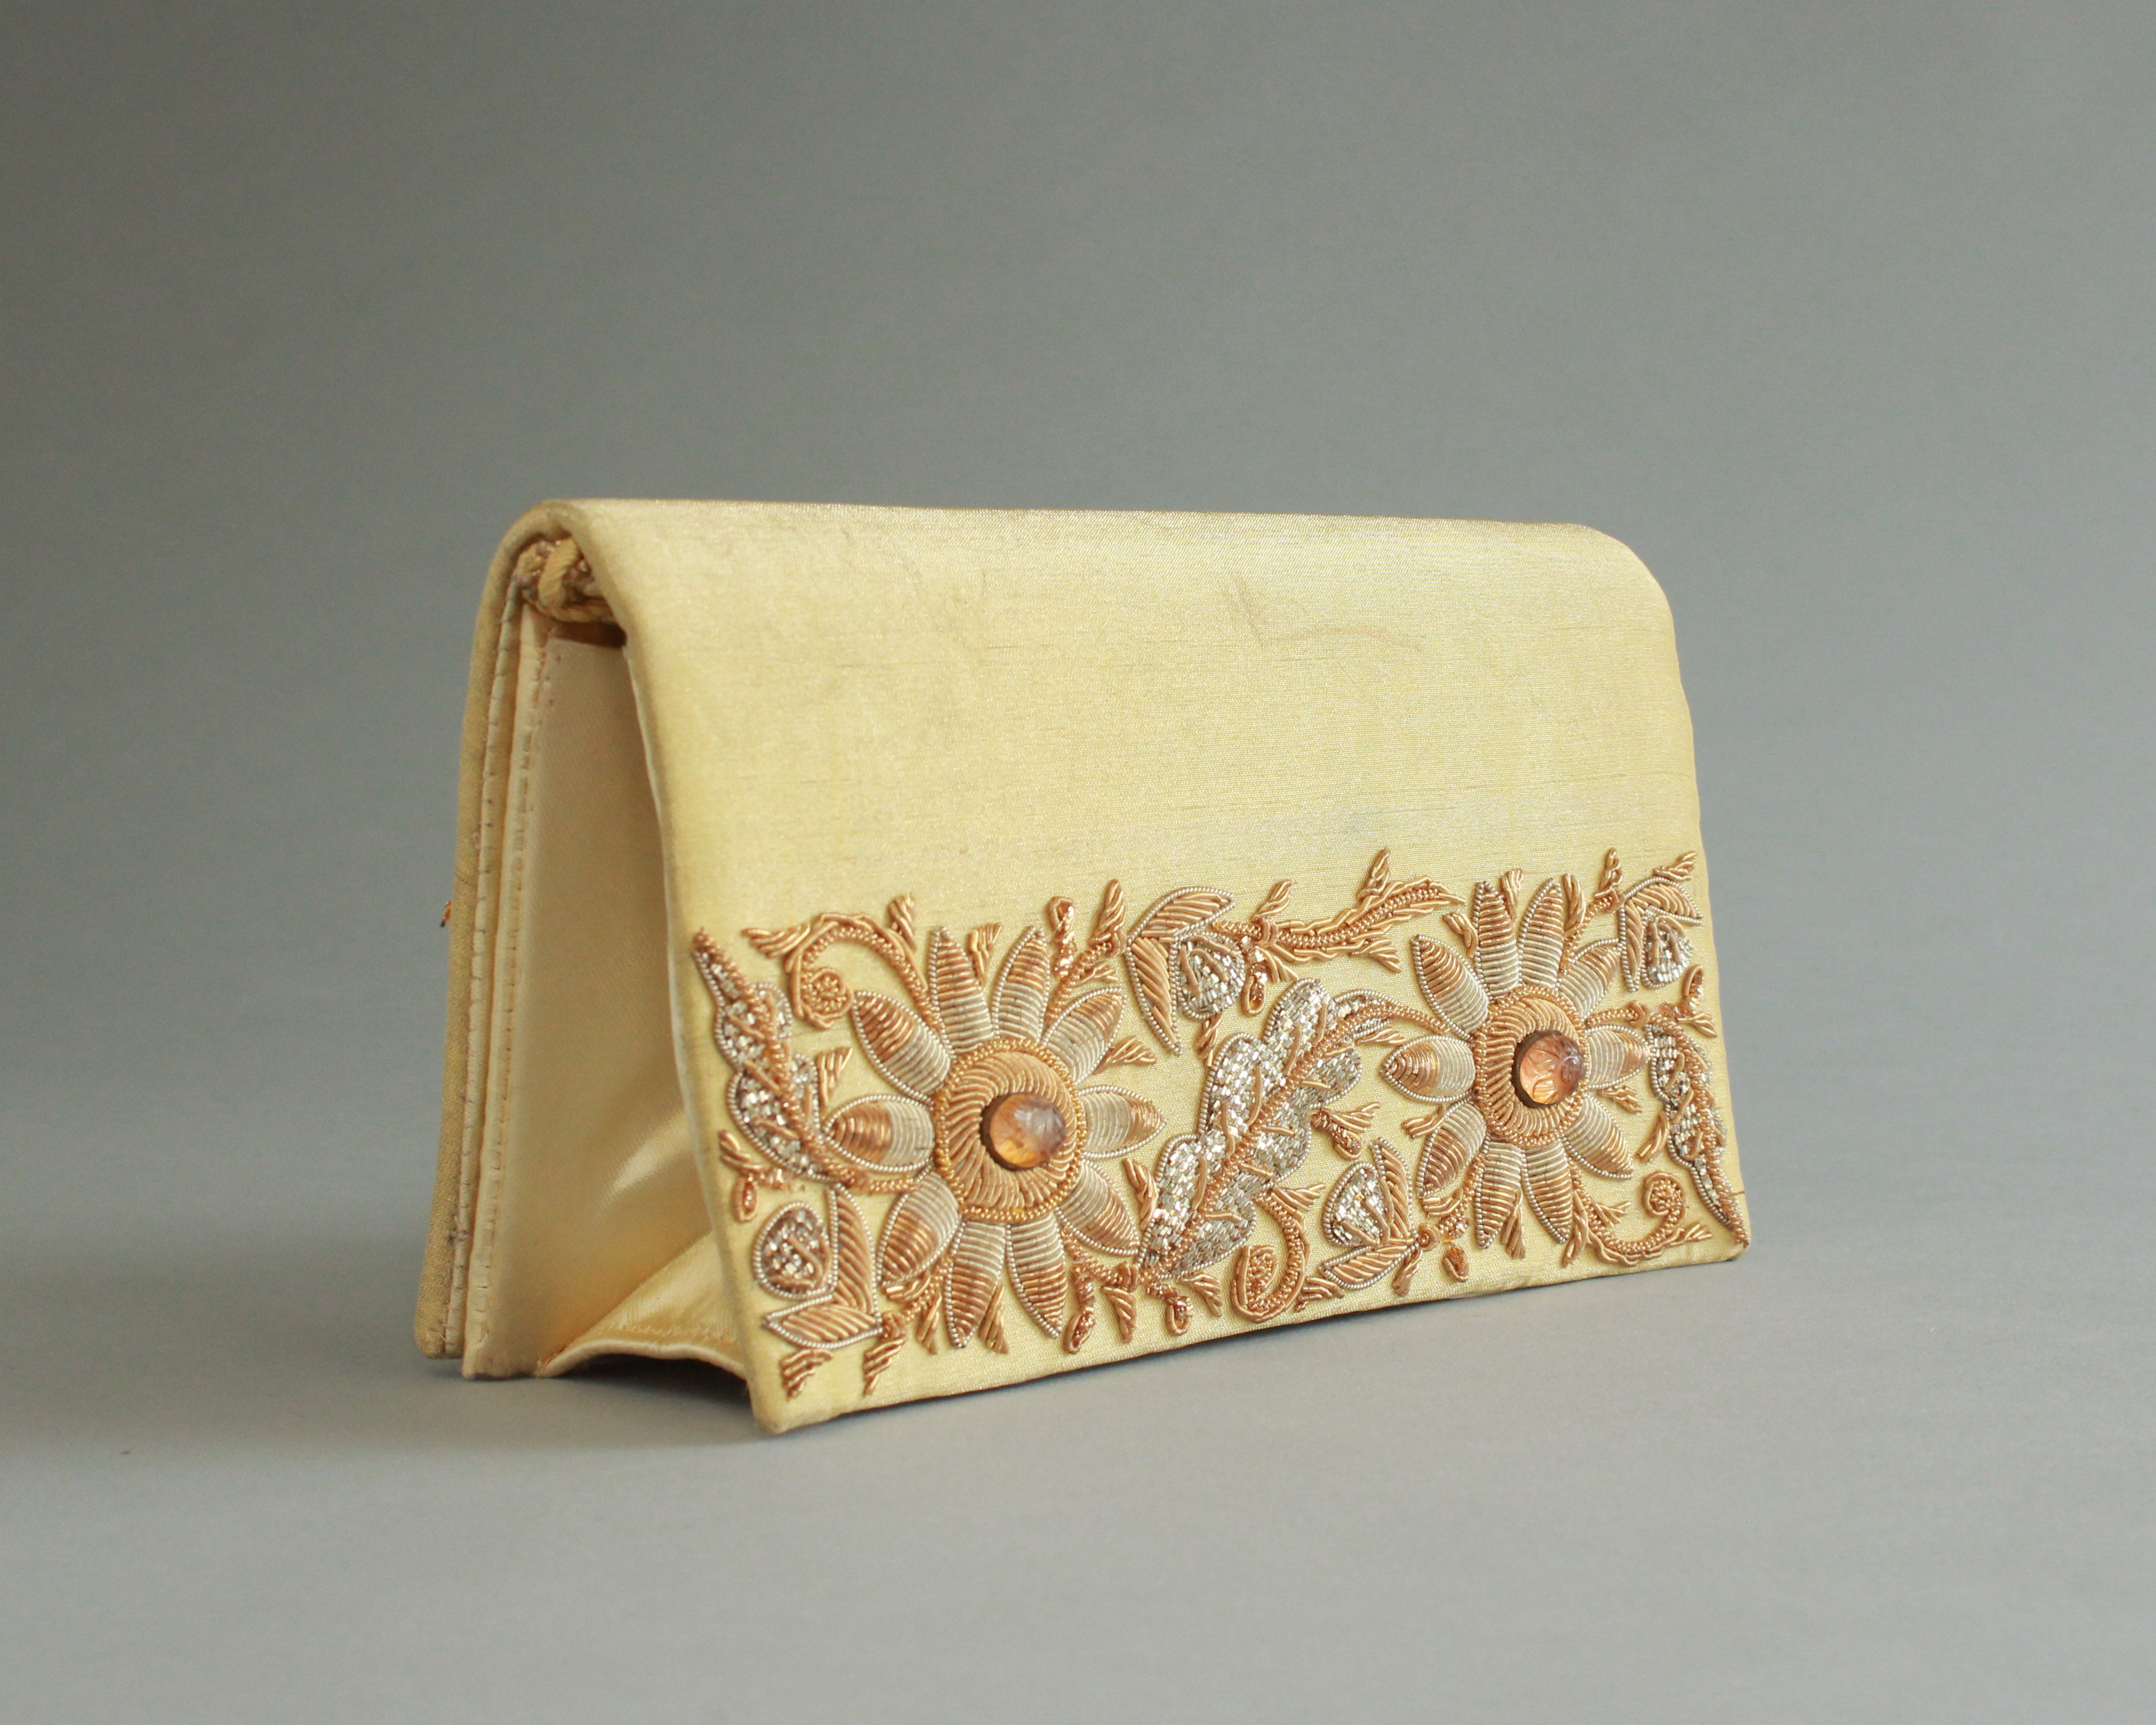 Gold beaded and embroidered satin evening bag handmade in India